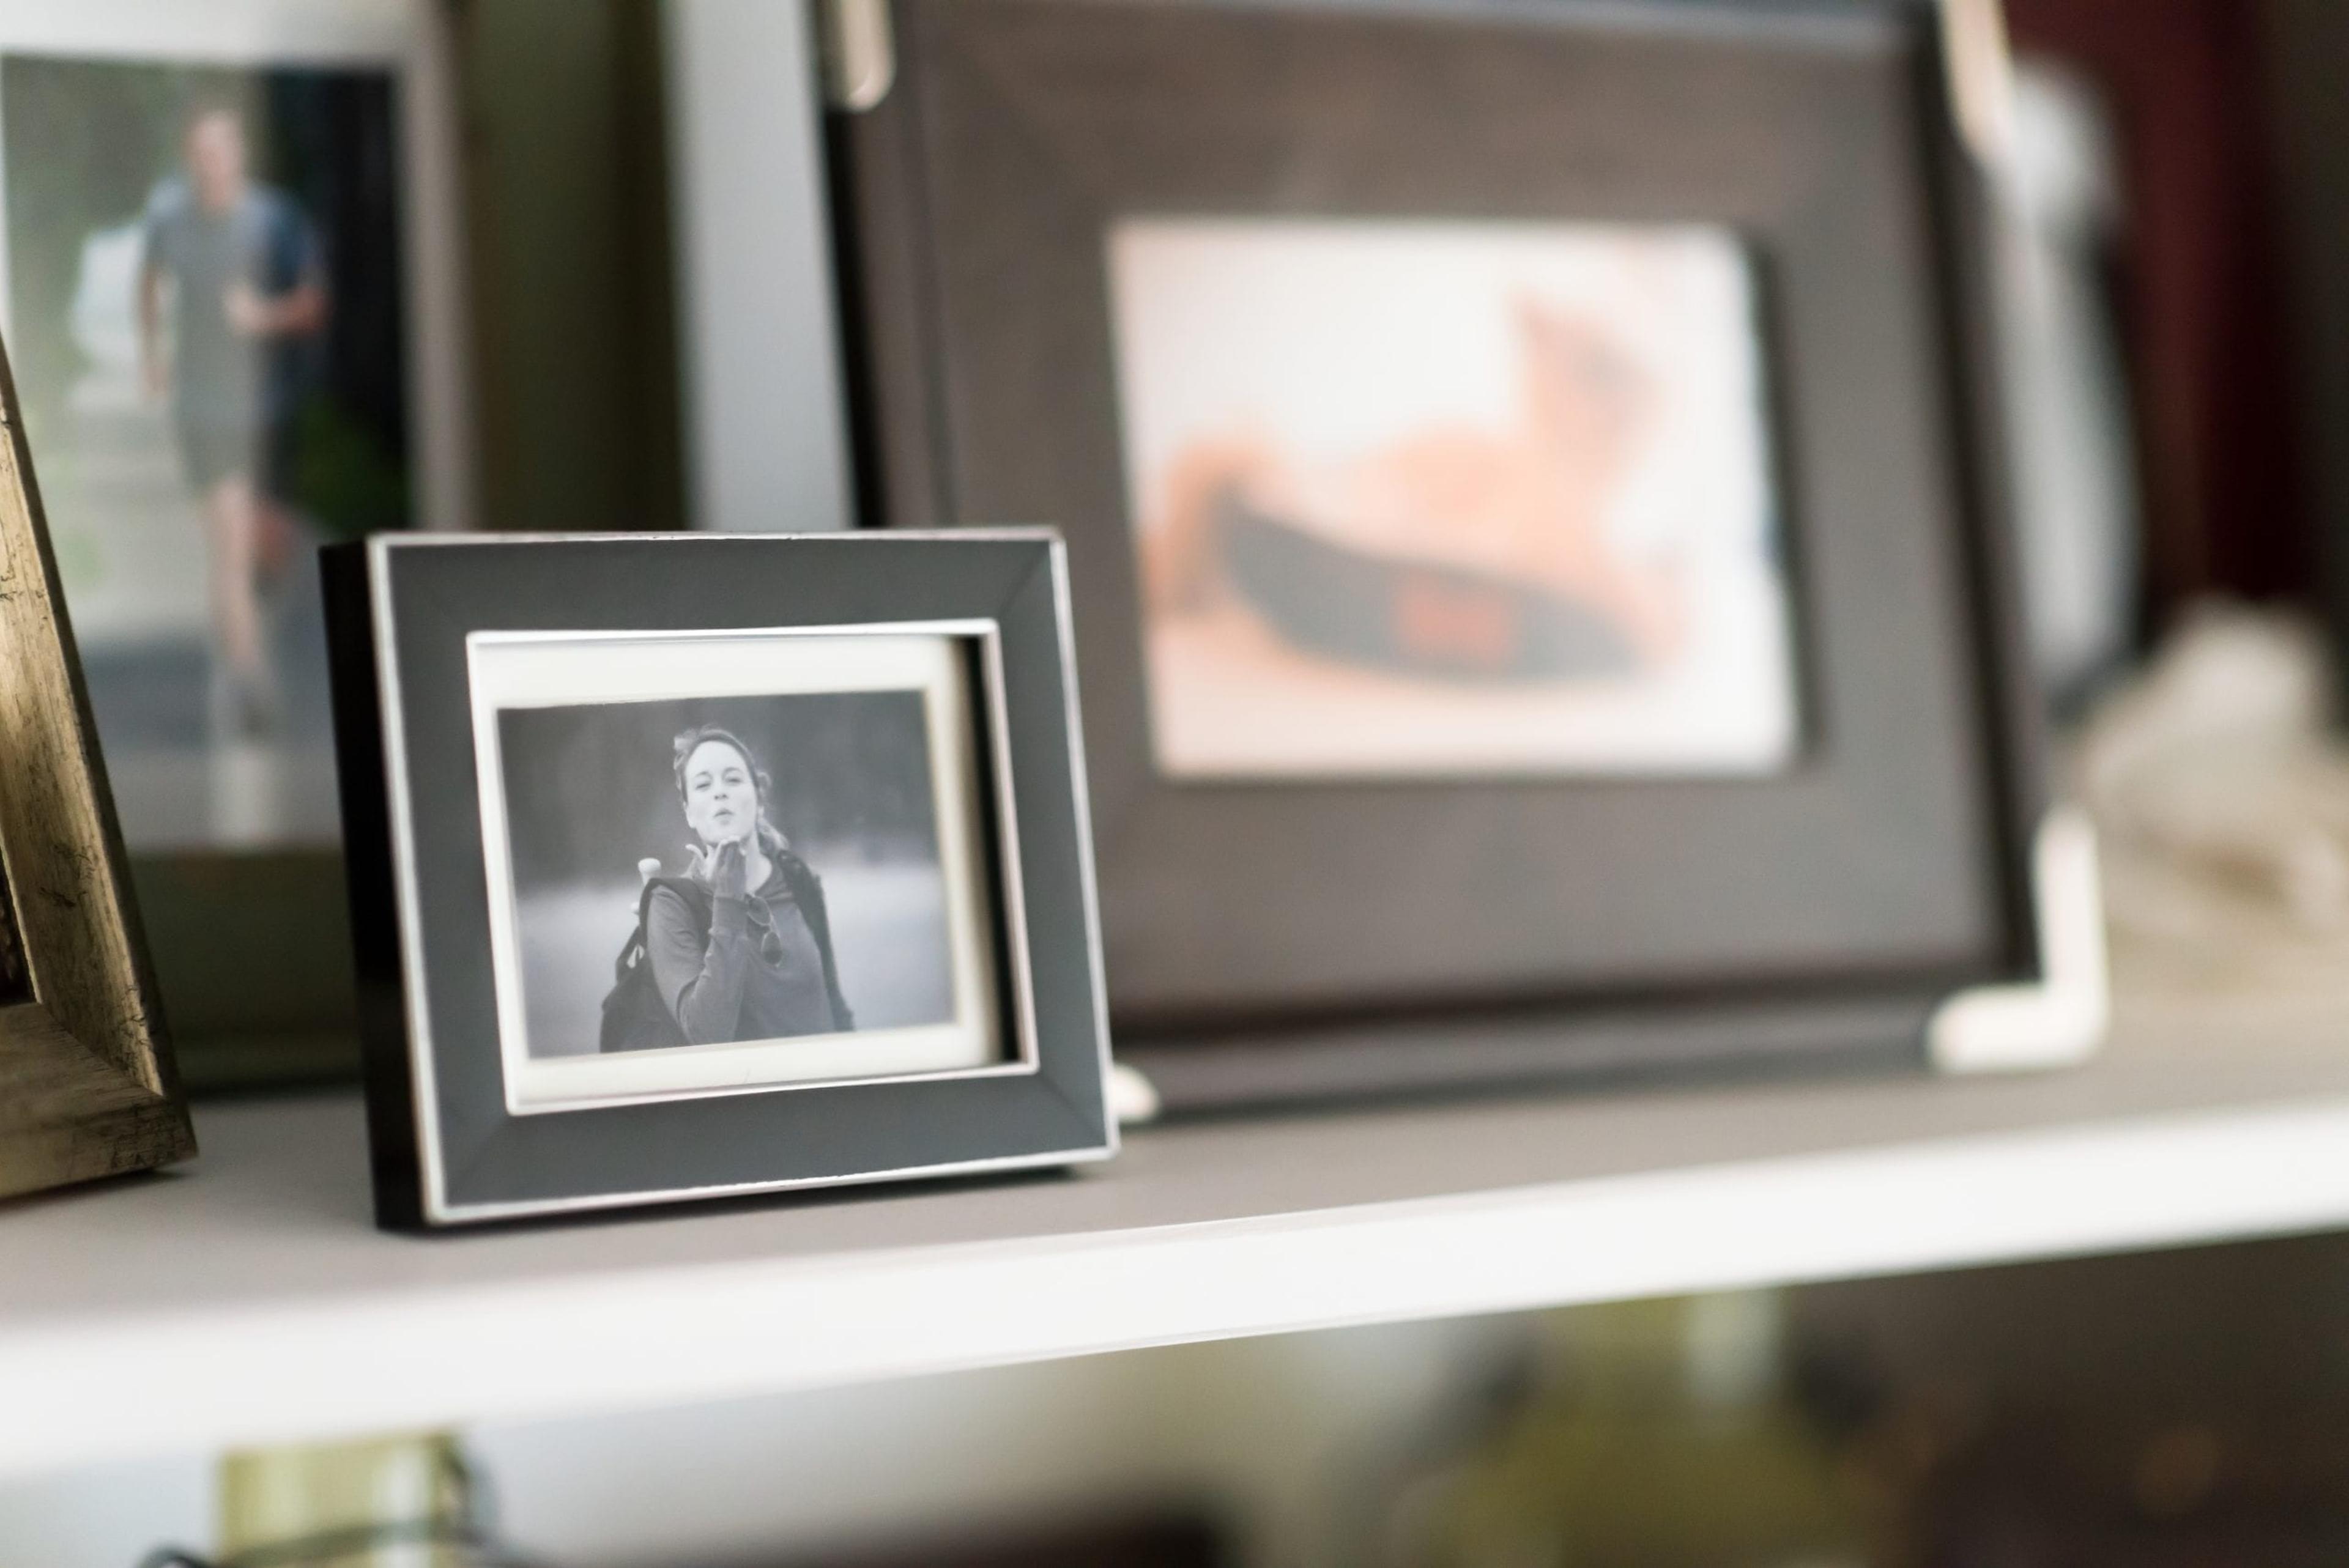 Framed black and white image of a woman on a mantel.